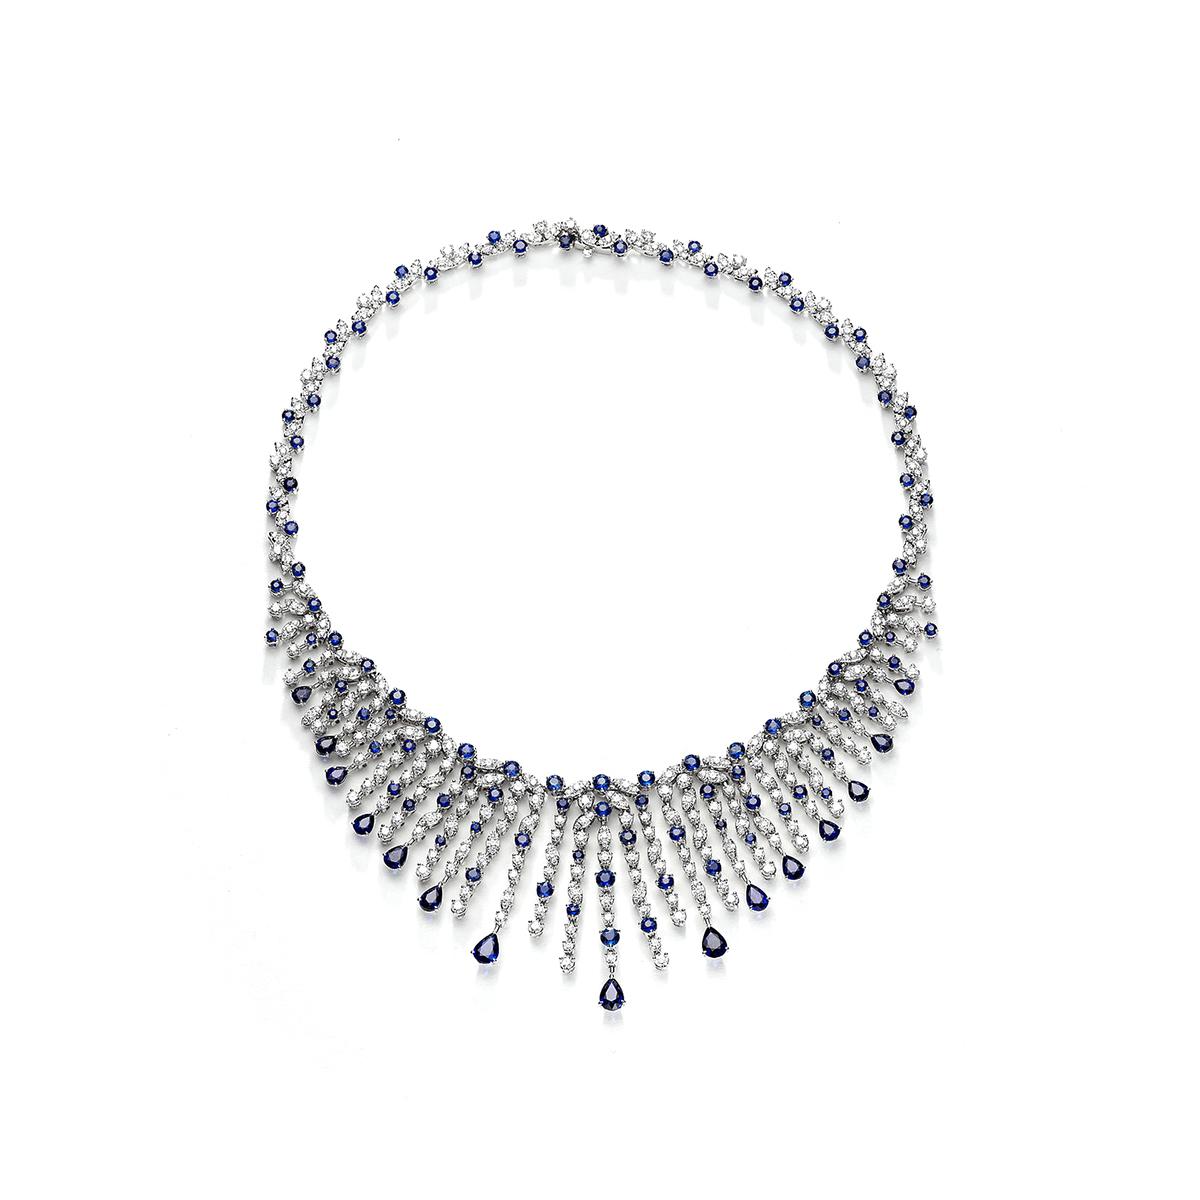 Necklace in 18kt white gold set with 116 sapphires 21.08 cts and 444 diamonds 11.86 cts